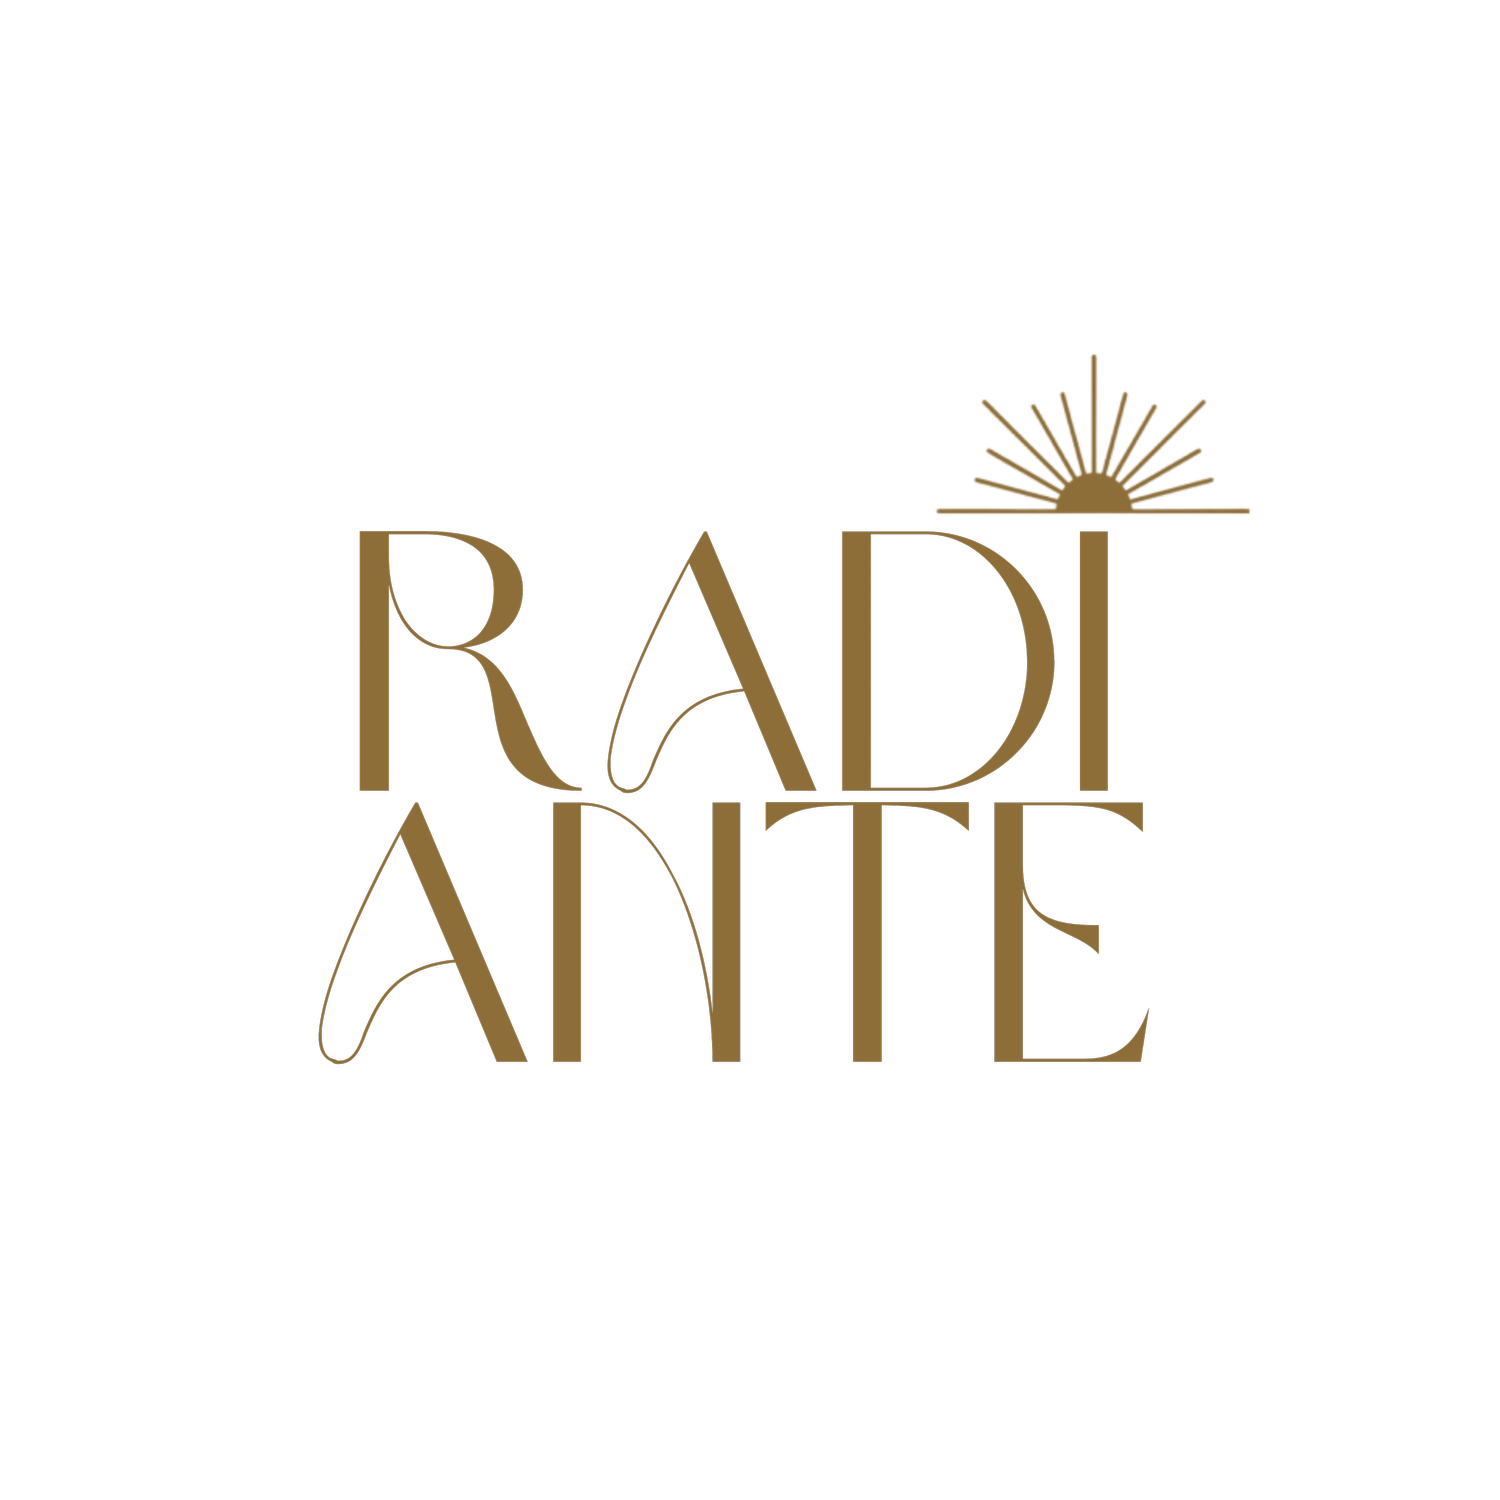 Radiante by Maria